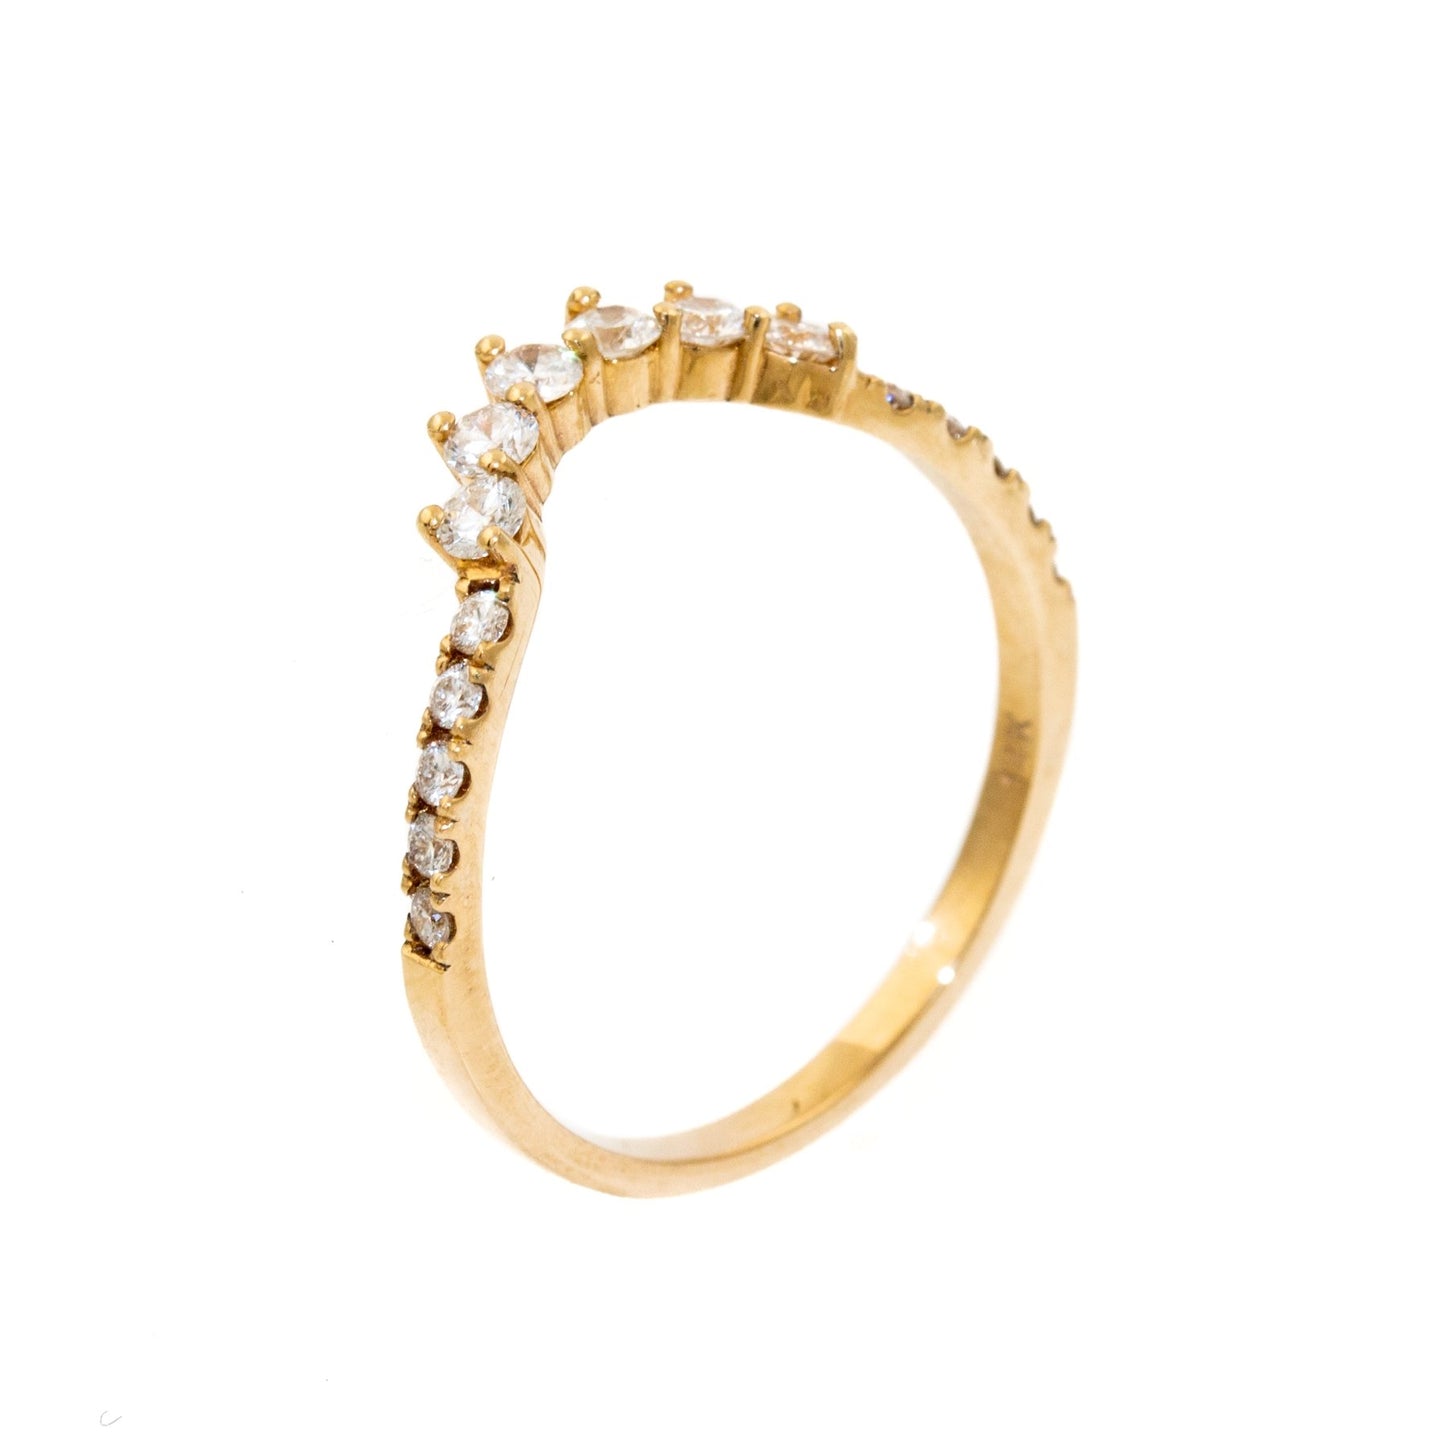 Gorgeous contemporary tiara style ring lined with diamonds that can be stacked with an engagement ring, creating a wedding suite, or stacked up and added to your collection!